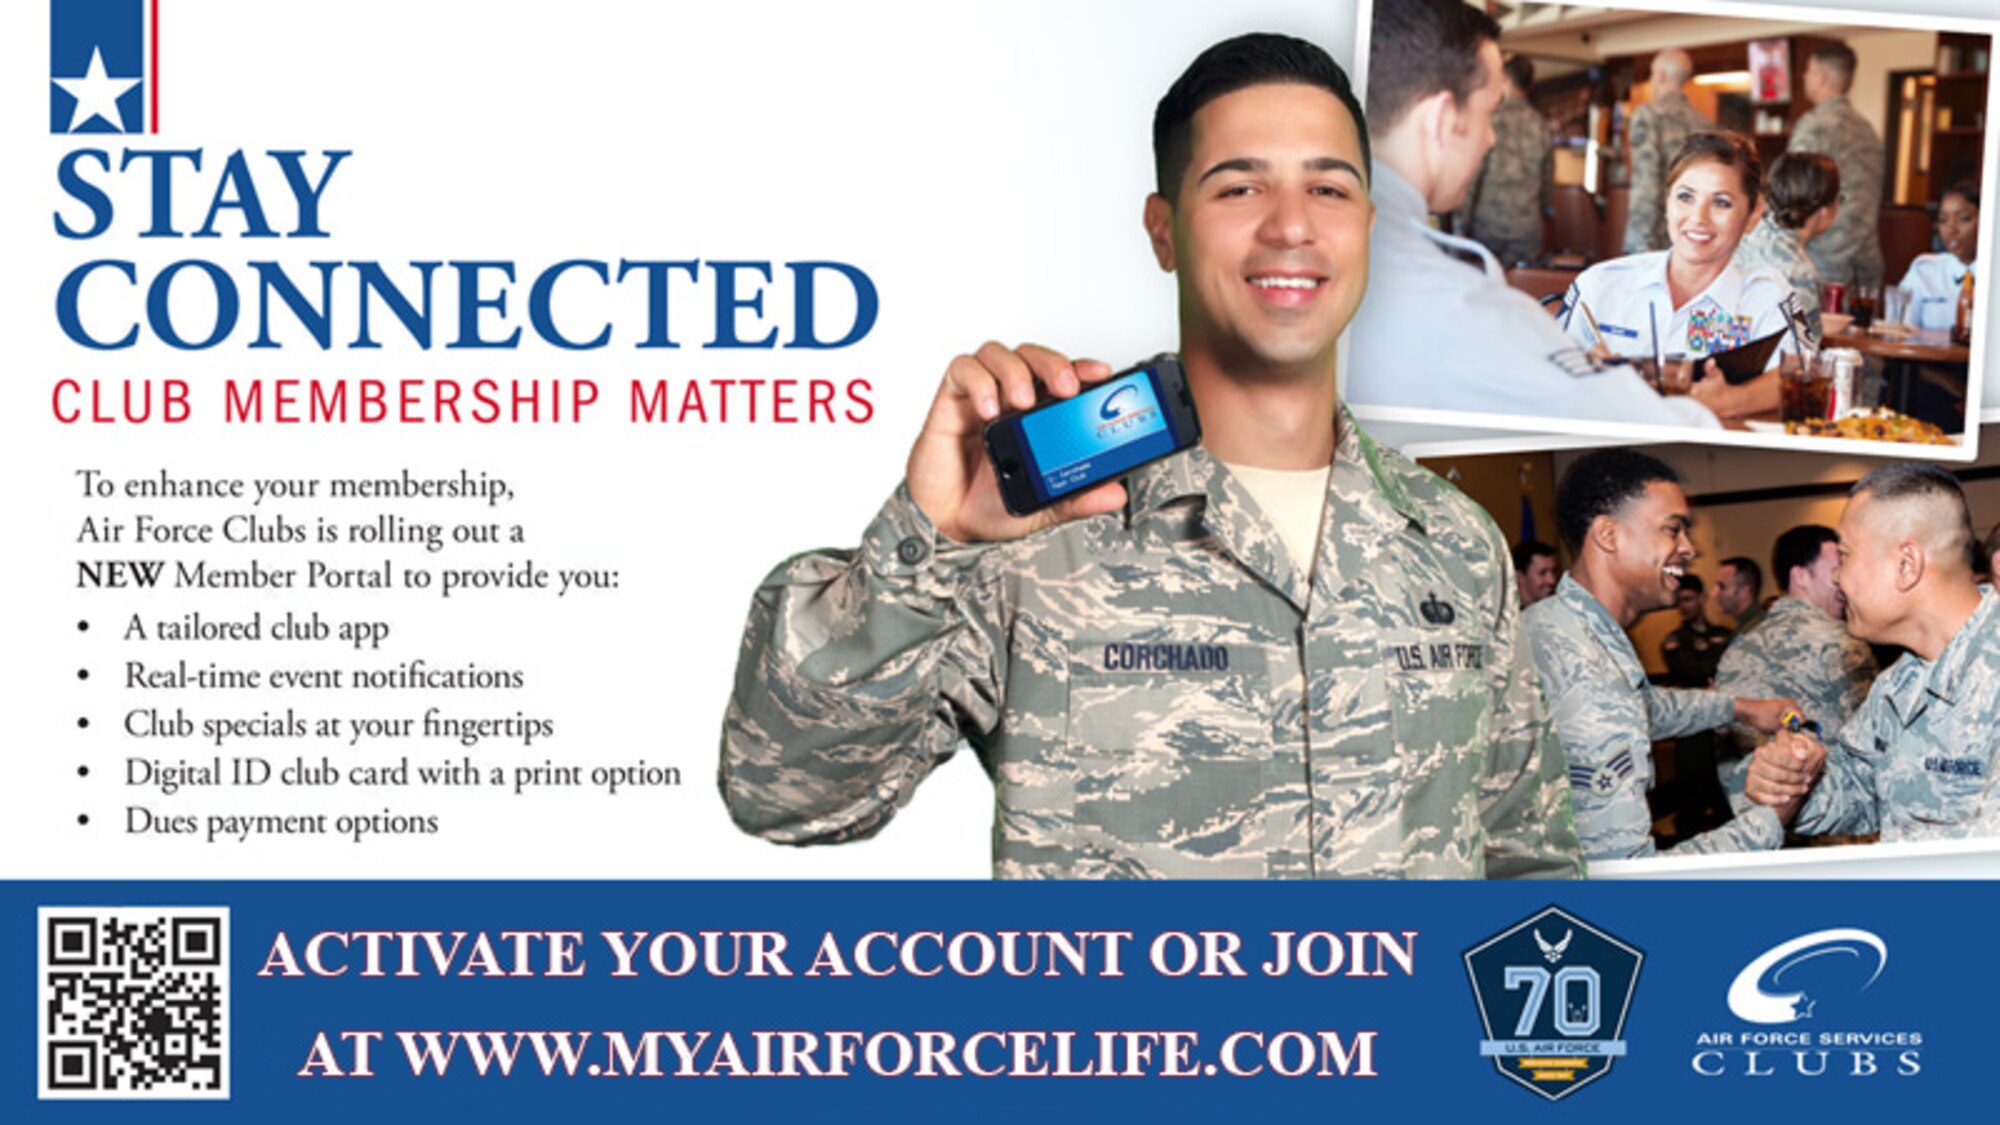 To enhance club membership, Air Force Clubs is rolling out a new member portal to provide a tailored app, real-time event notifications, club specials, digital ID club card with a print option and dues payment options. To learn more, visit www.myairforcelife.com. 